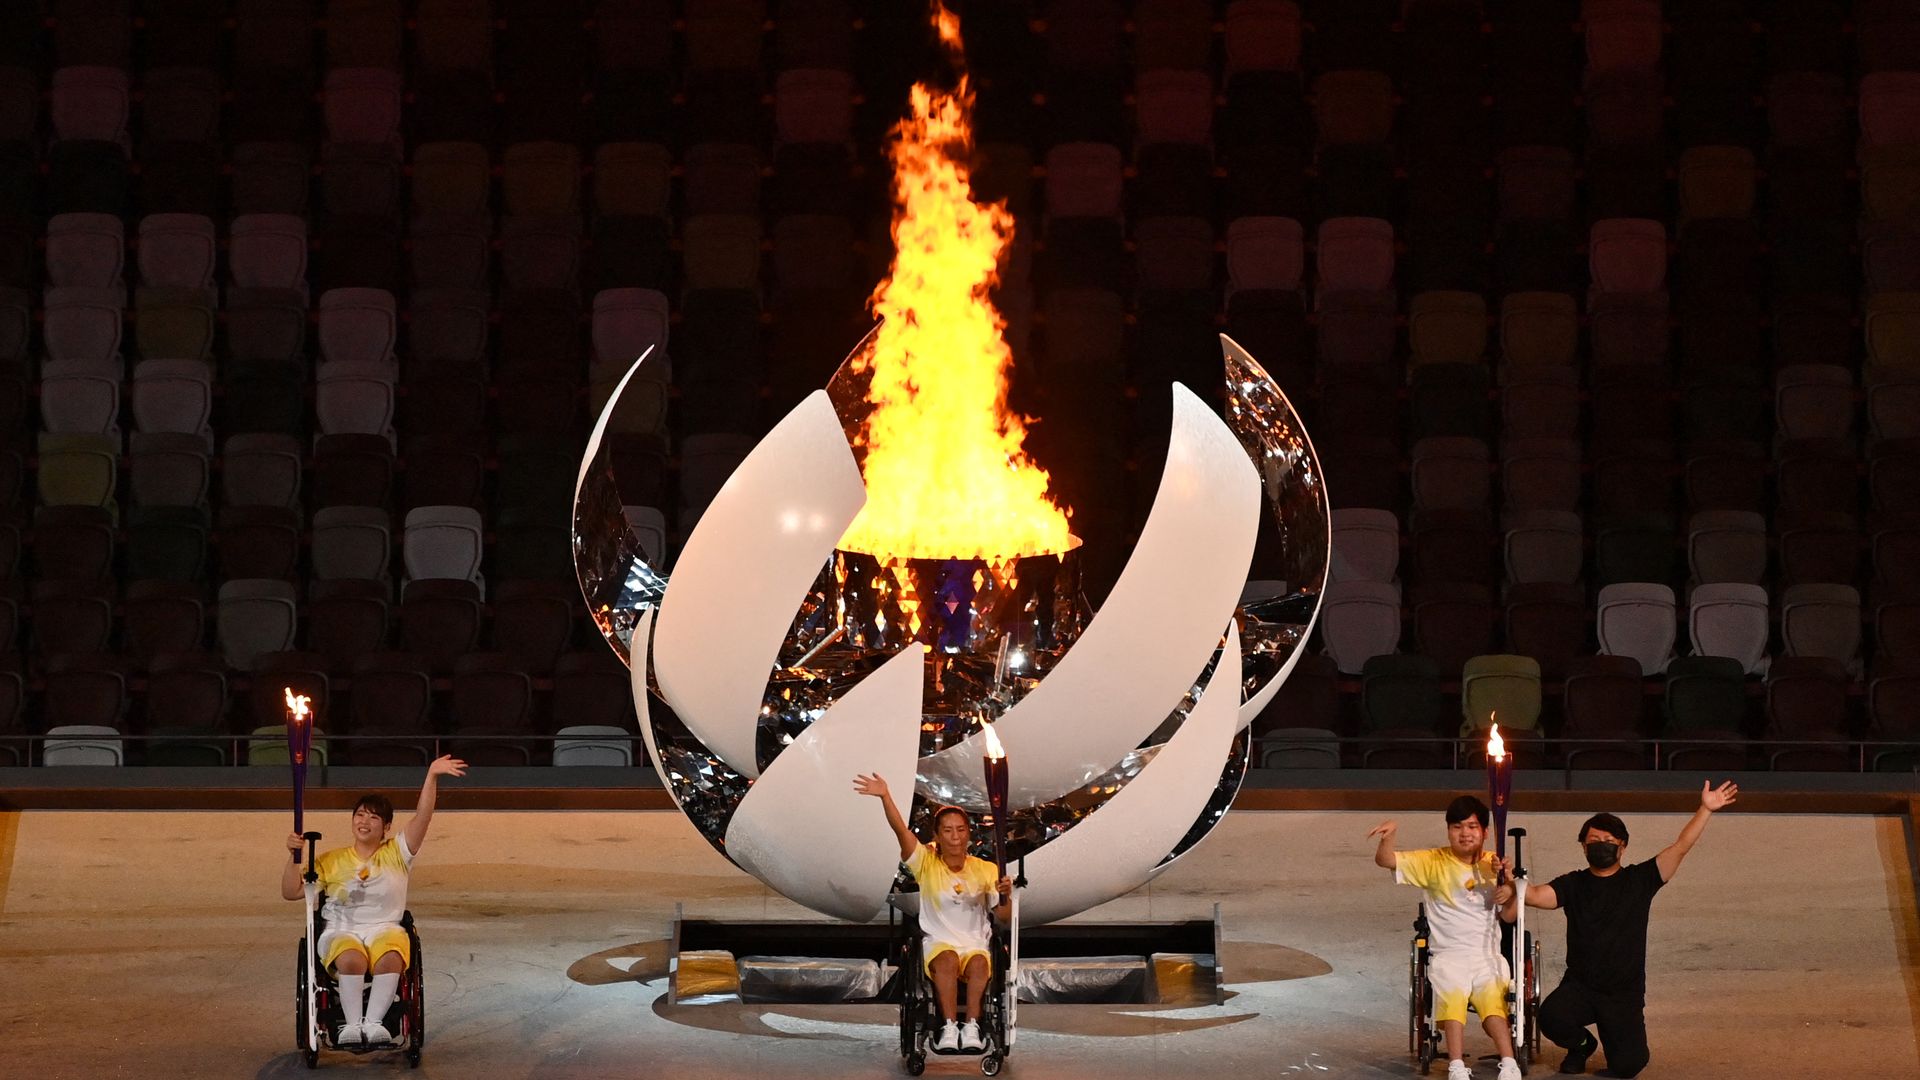 Three torchbearers wave after lighting the cauldron during the opening ceremony for the Tokyo 2020 Paralympic Games at the Olympic Stadium in Tokyo on August 24, 2021.